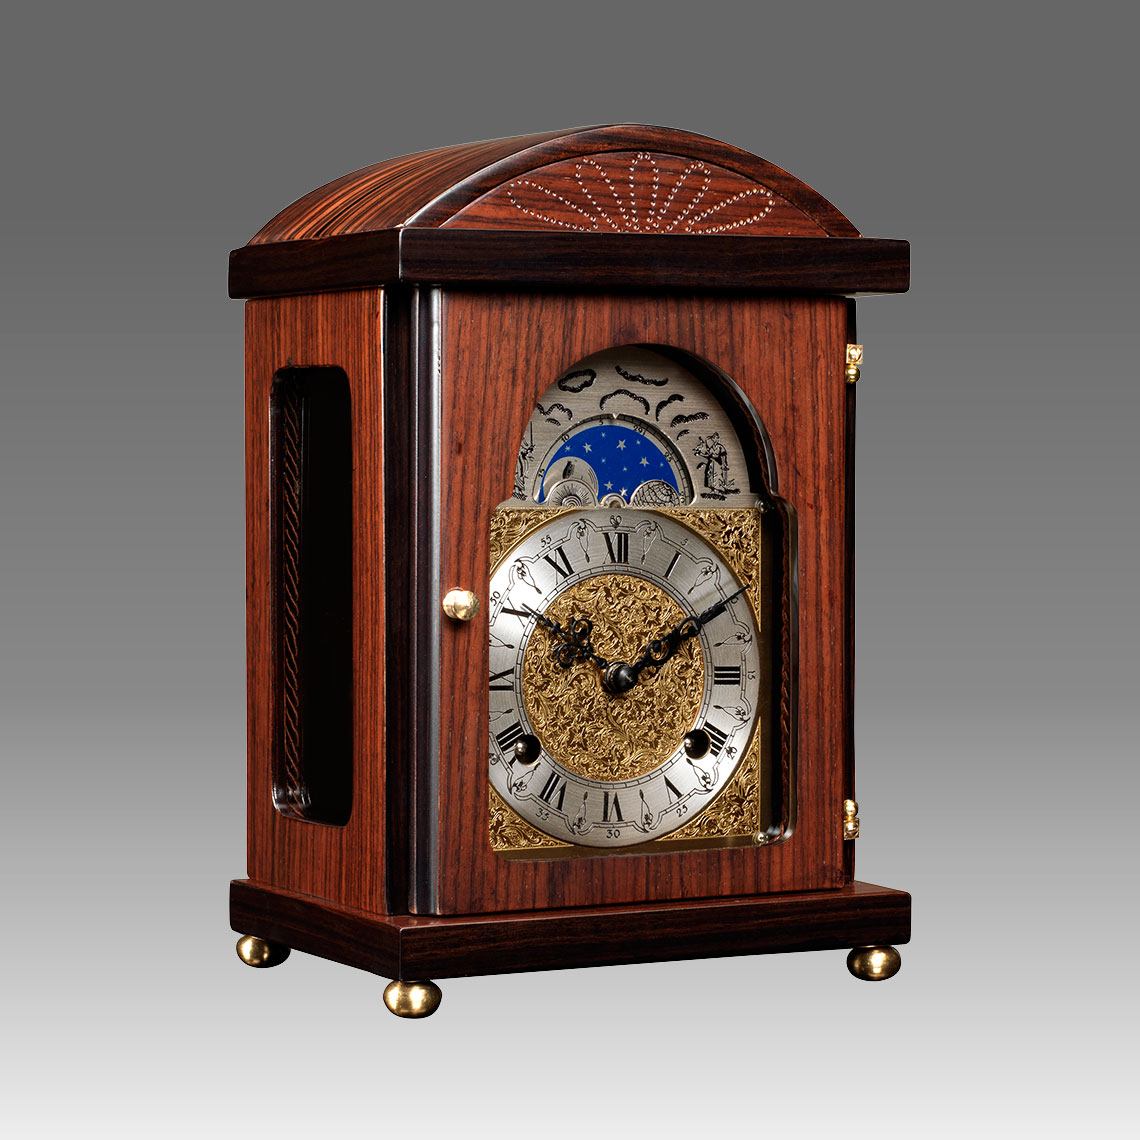 Mante Clock, Table Clock, Cimn Clock, Art.340/10 Palissander - Bim Bam melody on Bells, eatched decorated moon fase dial